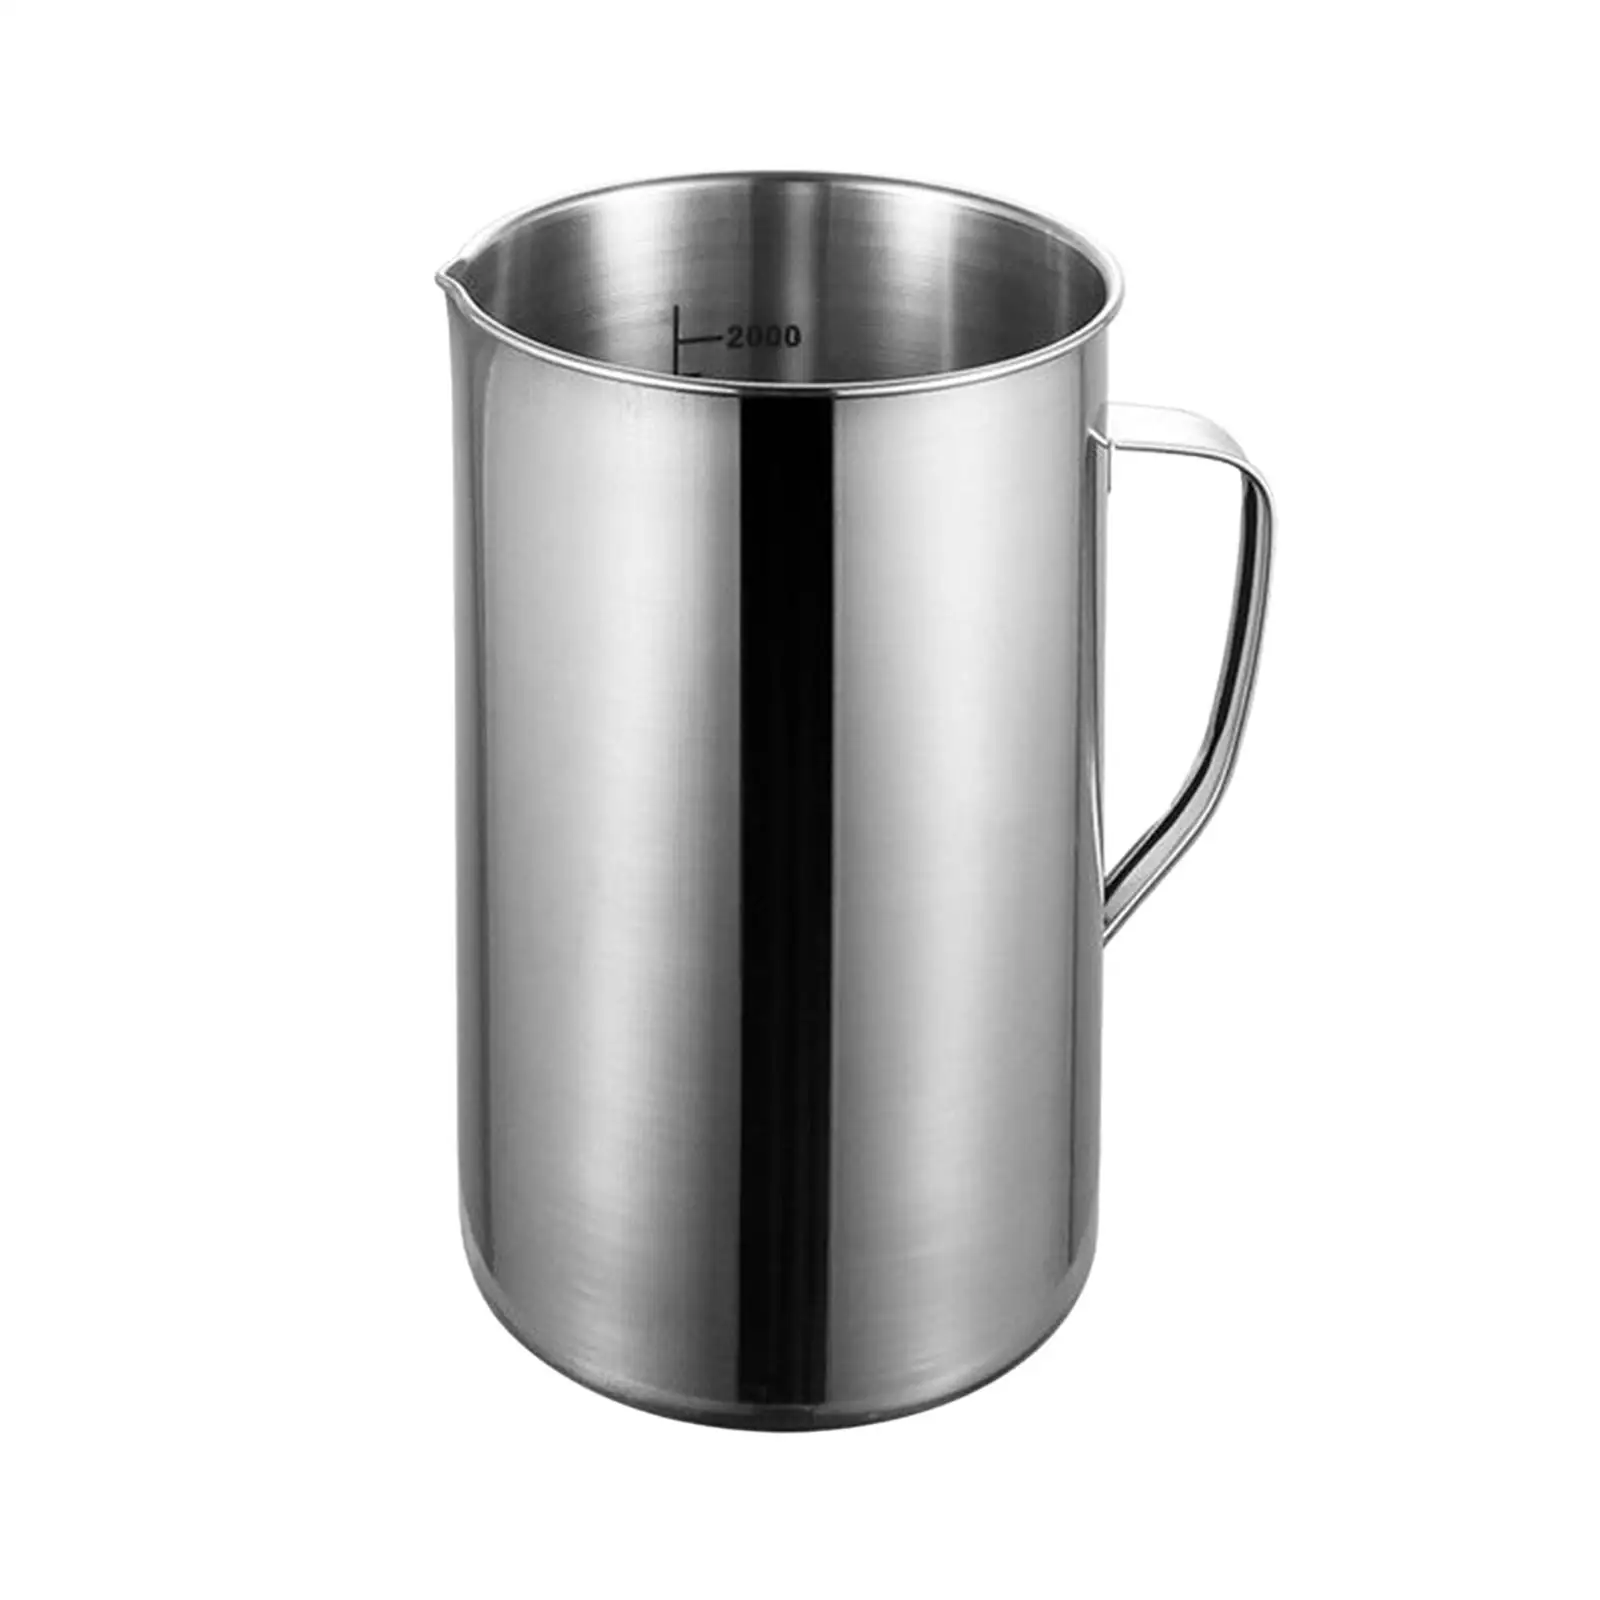 Steel Measuring Cup 2000ml Kitchen Tools Large Capacity for Restaurant Bar Party Measuring Jug Pouring Cup Liquid Measuring Cup